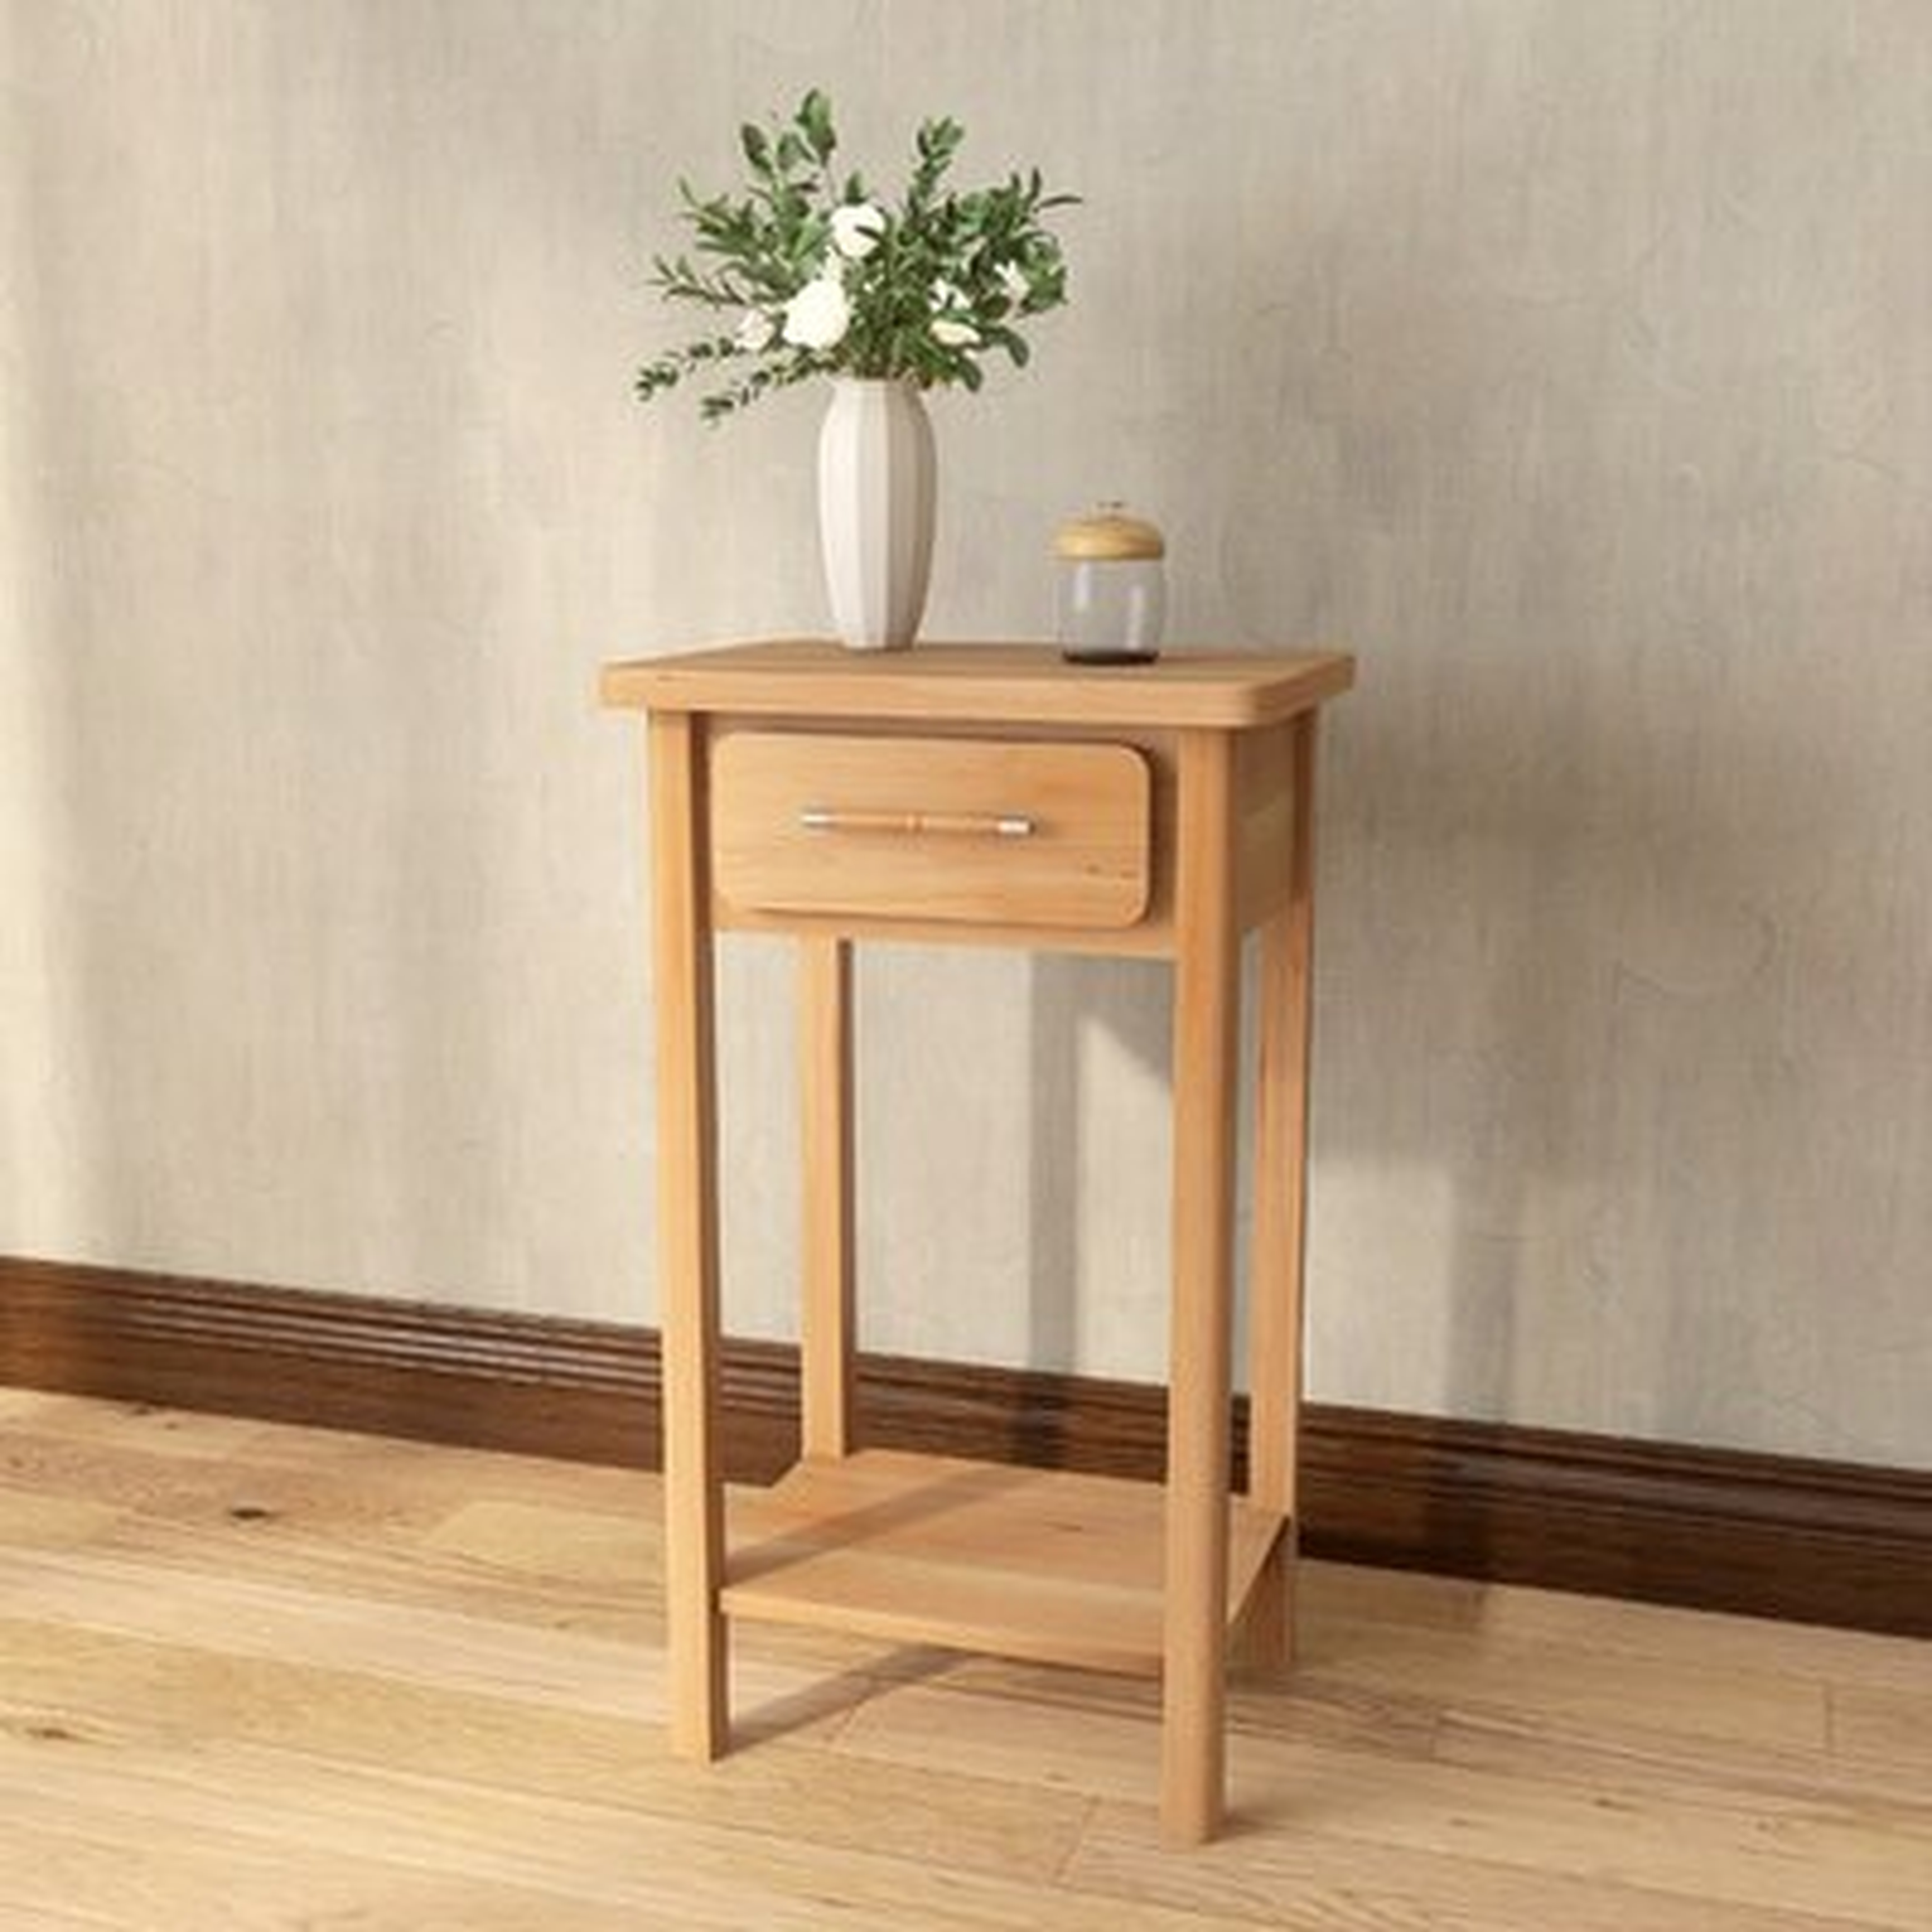 Jandrain End Table with Storage - Wayfair